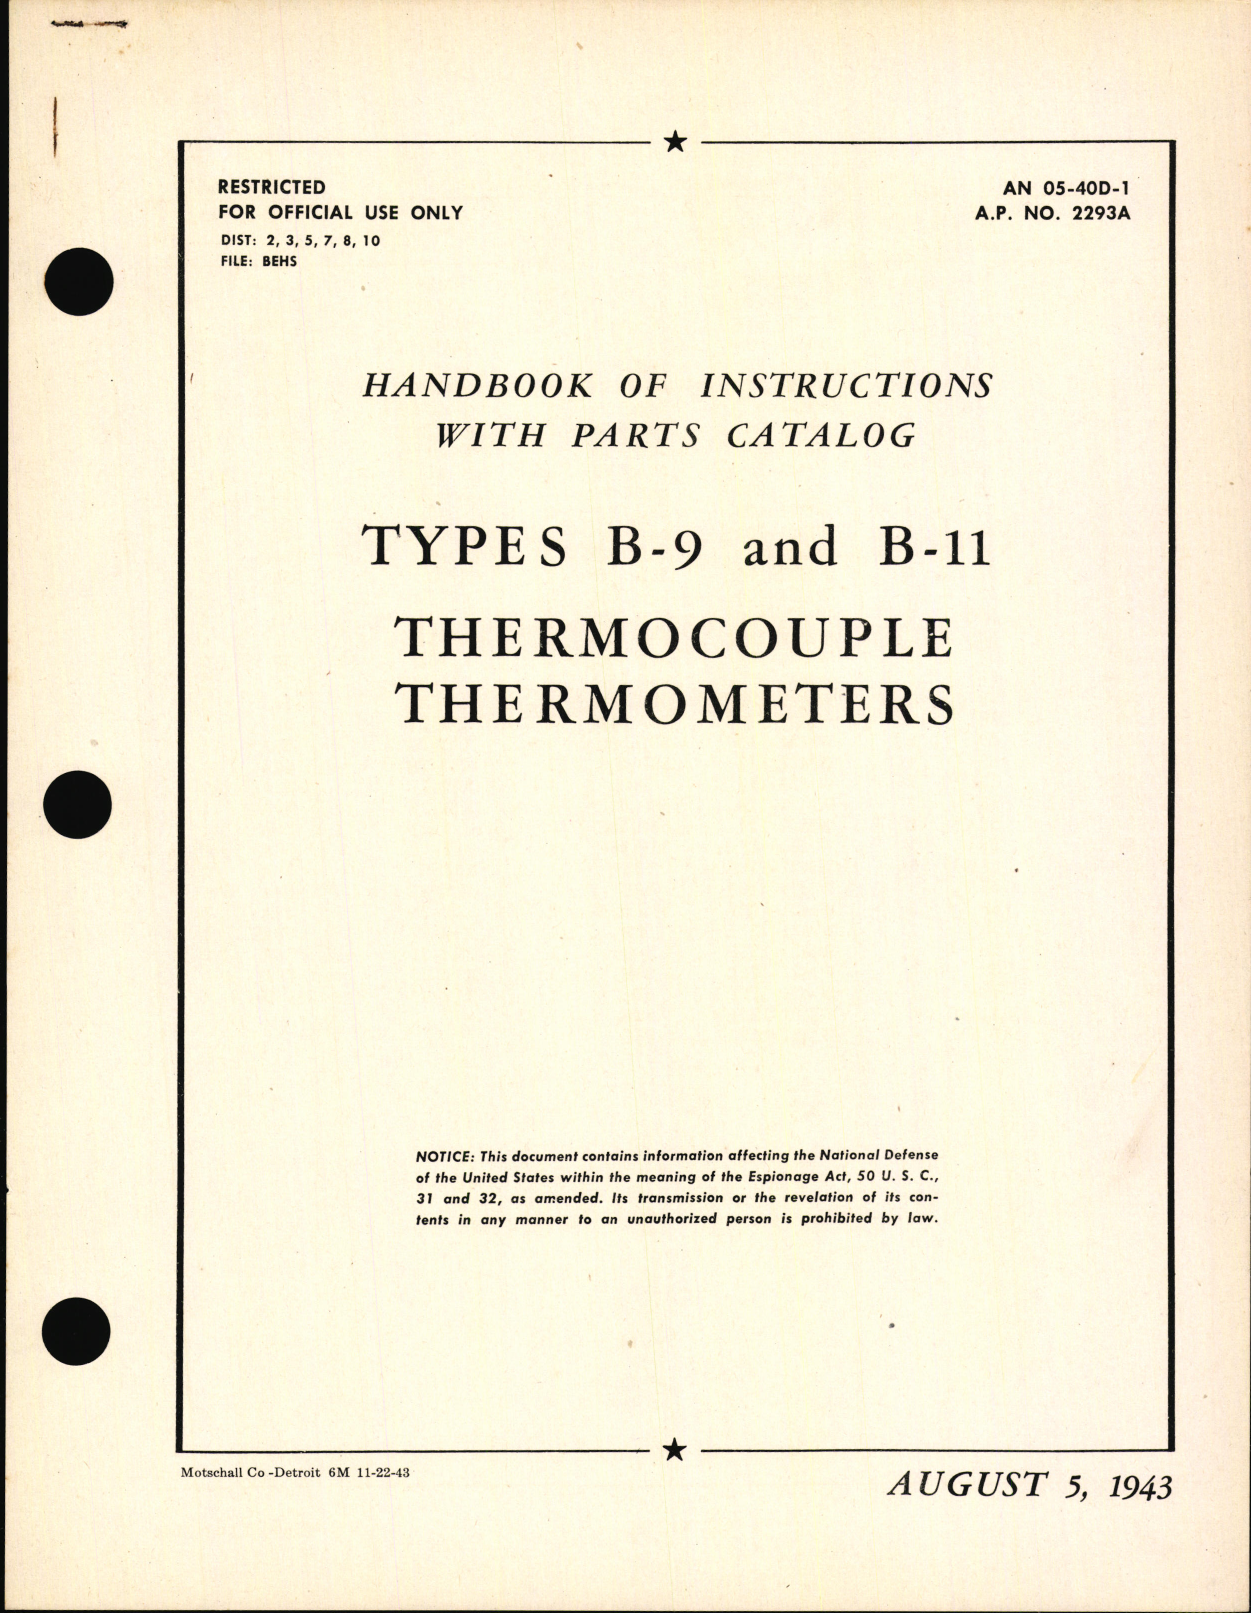 Sample page 1 from AirCorps Library document: Handbook of Instructions with Parts Catalog for Types B-9 and B-11 Thermocouple Thermometers